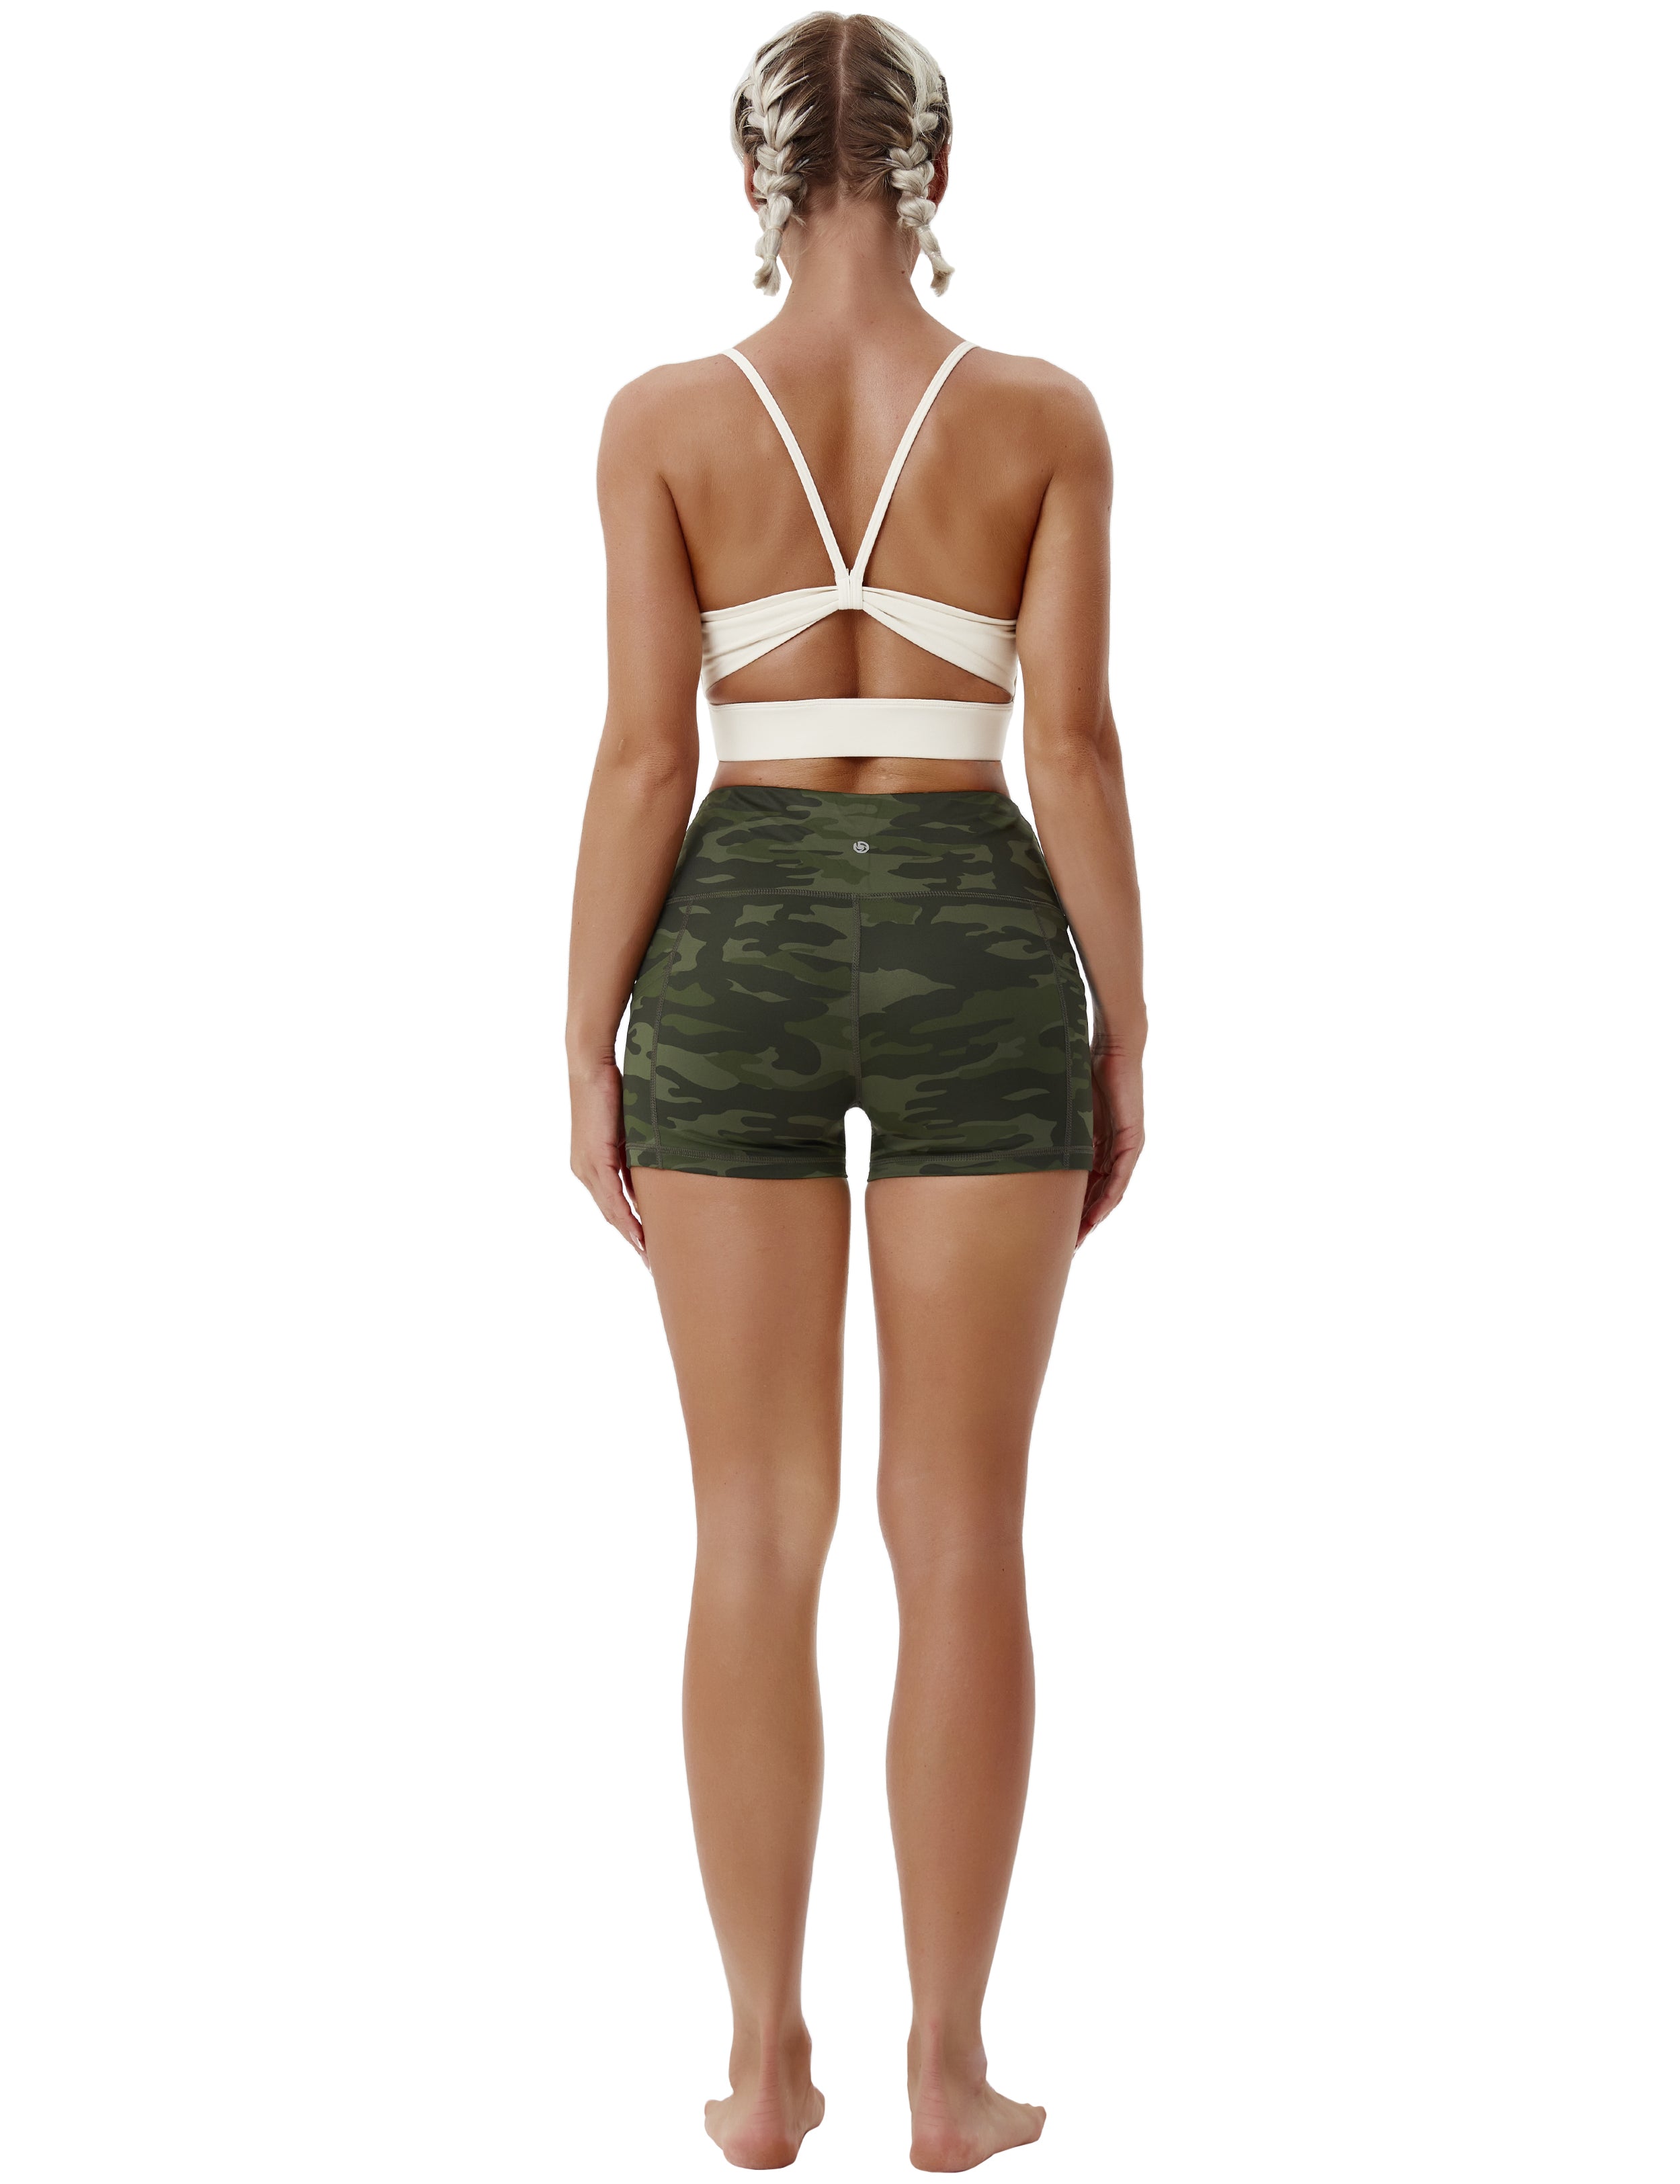 2.5" Printed Side Pockets Pilates Shorts green camo Sleek, soft, smooth and totally comfortable: our newest sexy style is here. Softest-ever fabric High elasticity High density 4-way stretch Fabric doesn't attract lint easily No see-through Moisture-wicking Machine wash 78% Polyester, 22% Spandex